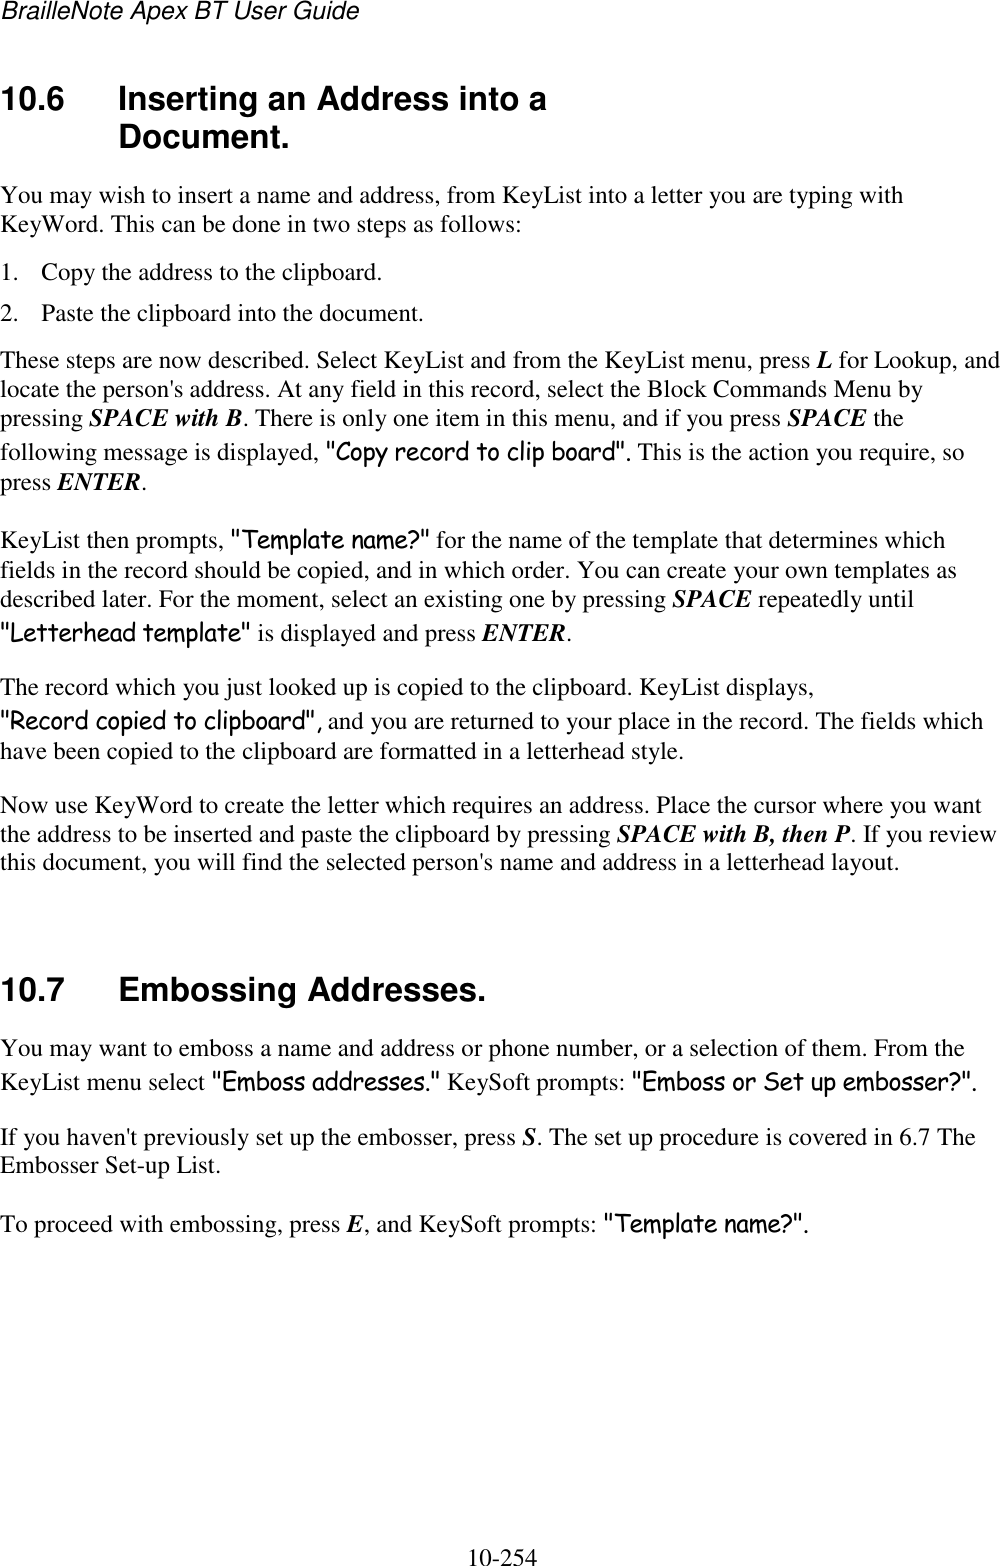 BrailleNote Apex BT User Guide   10-254   10.6  Inserting an Address into a Document. You may wish to insert a name and address, from KeyList into a letter you are typing with KeyWord. This can be done in two steps as follows: 1. Copy the address to the clipboard. 2. Paste the clipboard into the document. These steps are now described. Select KeyList and from the KeyList menu, press L for Lookup, and locate the person&apos;s address. At any field in this record, select the Block Commands Menu by pressing SPACE with B. There is only one item in this menu, and if you press SPACE the following message is displayed, &quot;Copy record to clip board&quot;. This is the action you require, so press ENTER. KeyList then prompts, &quot;Template name?&quot; for the name of the template that determines which fields in the record should be copied, and in which order. You can create your own templates as described later. For the moment, select an existing one by pressing SPACE repeatedly until &quot;Letterhead template&quot; is displayed and press ENTER. The record which you just looked up is copied to the clipboard. KeyList displays, &quot;Record copied to clipboard&quot;, and you are returned to your place in the record. The fields which have been copied to the clipboard are formatted in a letterhead style. Now use KeyWord to create the letter which requires an address. Place the cursor where you want the address to be inserted and paste the clipboard by pressing SPACE with B, then P. If you review this document, you will find the selected person&apos;s name and address in a letterhead layout.   10.7  Embossing Addresses. You may want to emboss a name and address or phone number, or a selection of them. From the KeyList menu select &quot;Emboss addresses.&quot; KeySoft prompts: &quot;Emboss or Set up embosser?&quot;. If you haven&apos;t previously set up the embosser, press S. The set up procedure is covered in 6.7 The Embosser Set-up List. To proceed with embossing, press E, and KeySoft prompts: &quot;Template name?&quot;.   